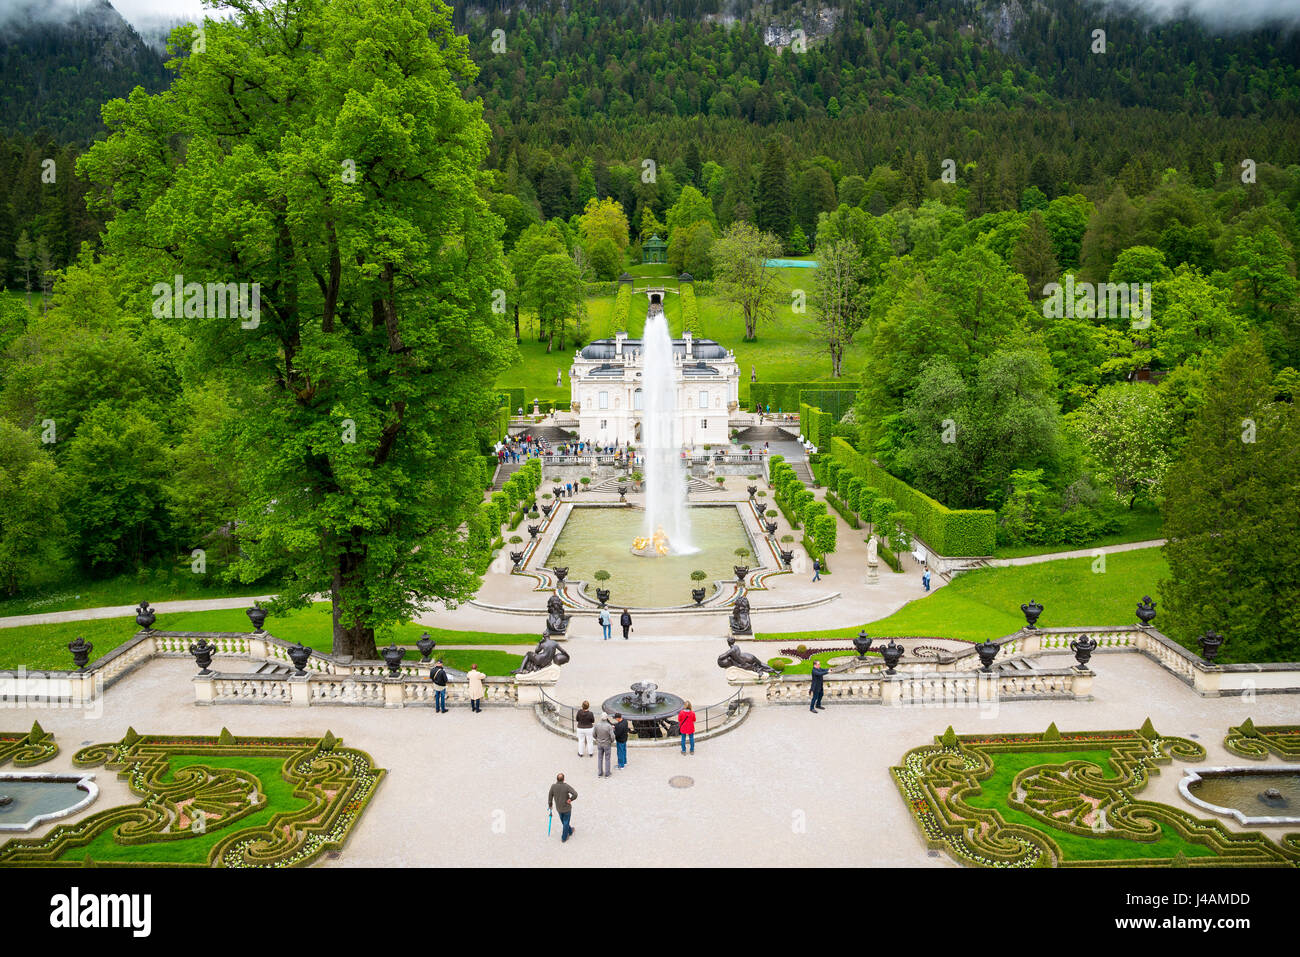 Ettal, Germany - June 5, 2016: Linderhof Palace in Baviera, Germany, one of the castles of former king Ludwig II. Stock Photo